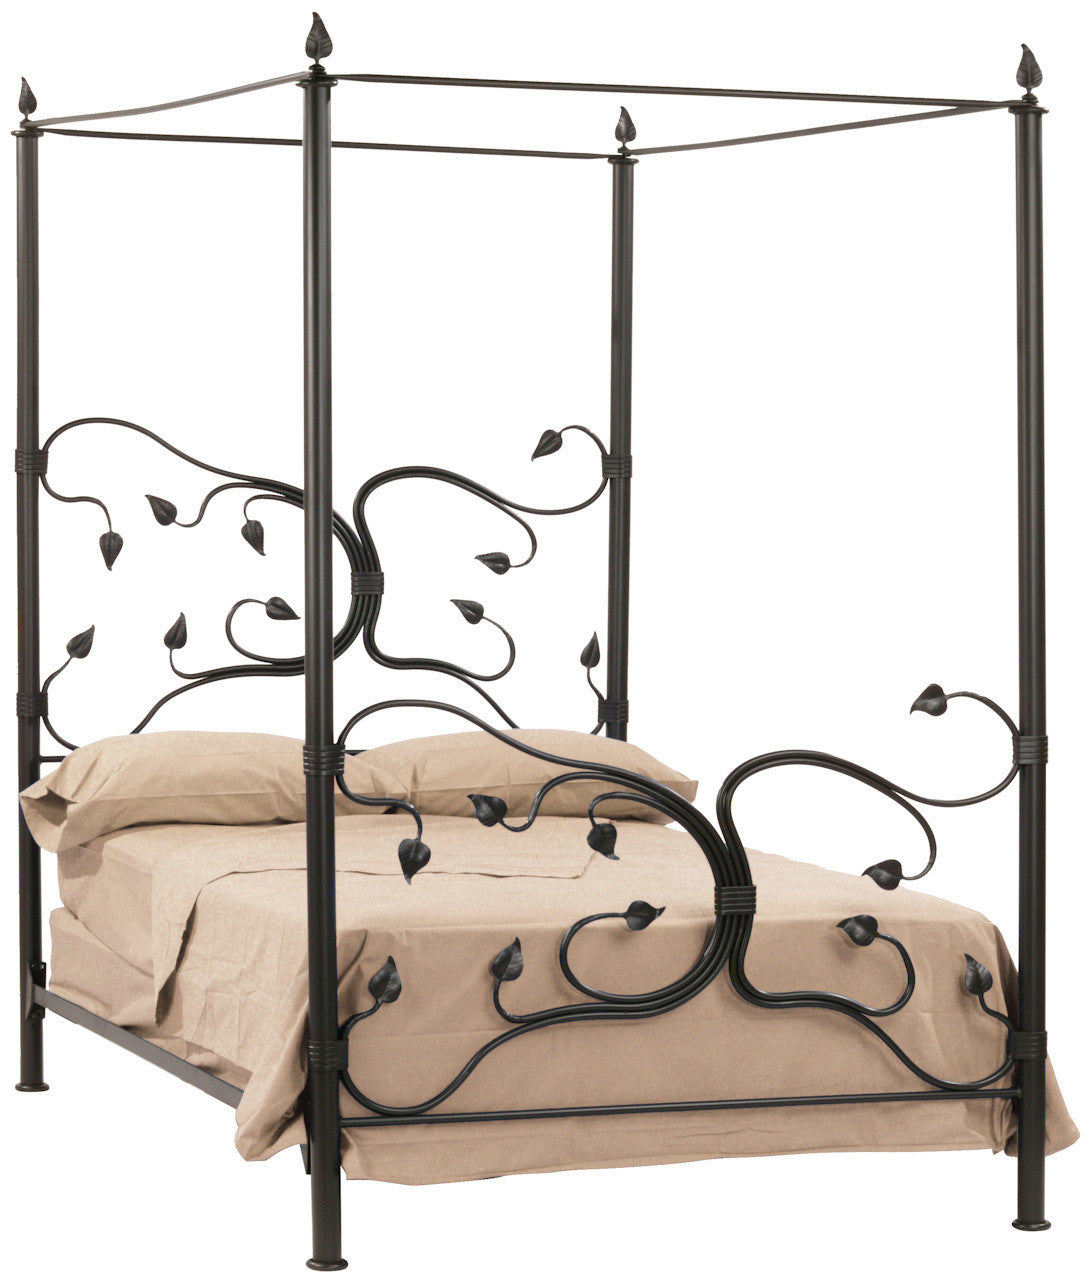 Stone County Ironworks 900-792 Eden Isle Canopy Full Bed